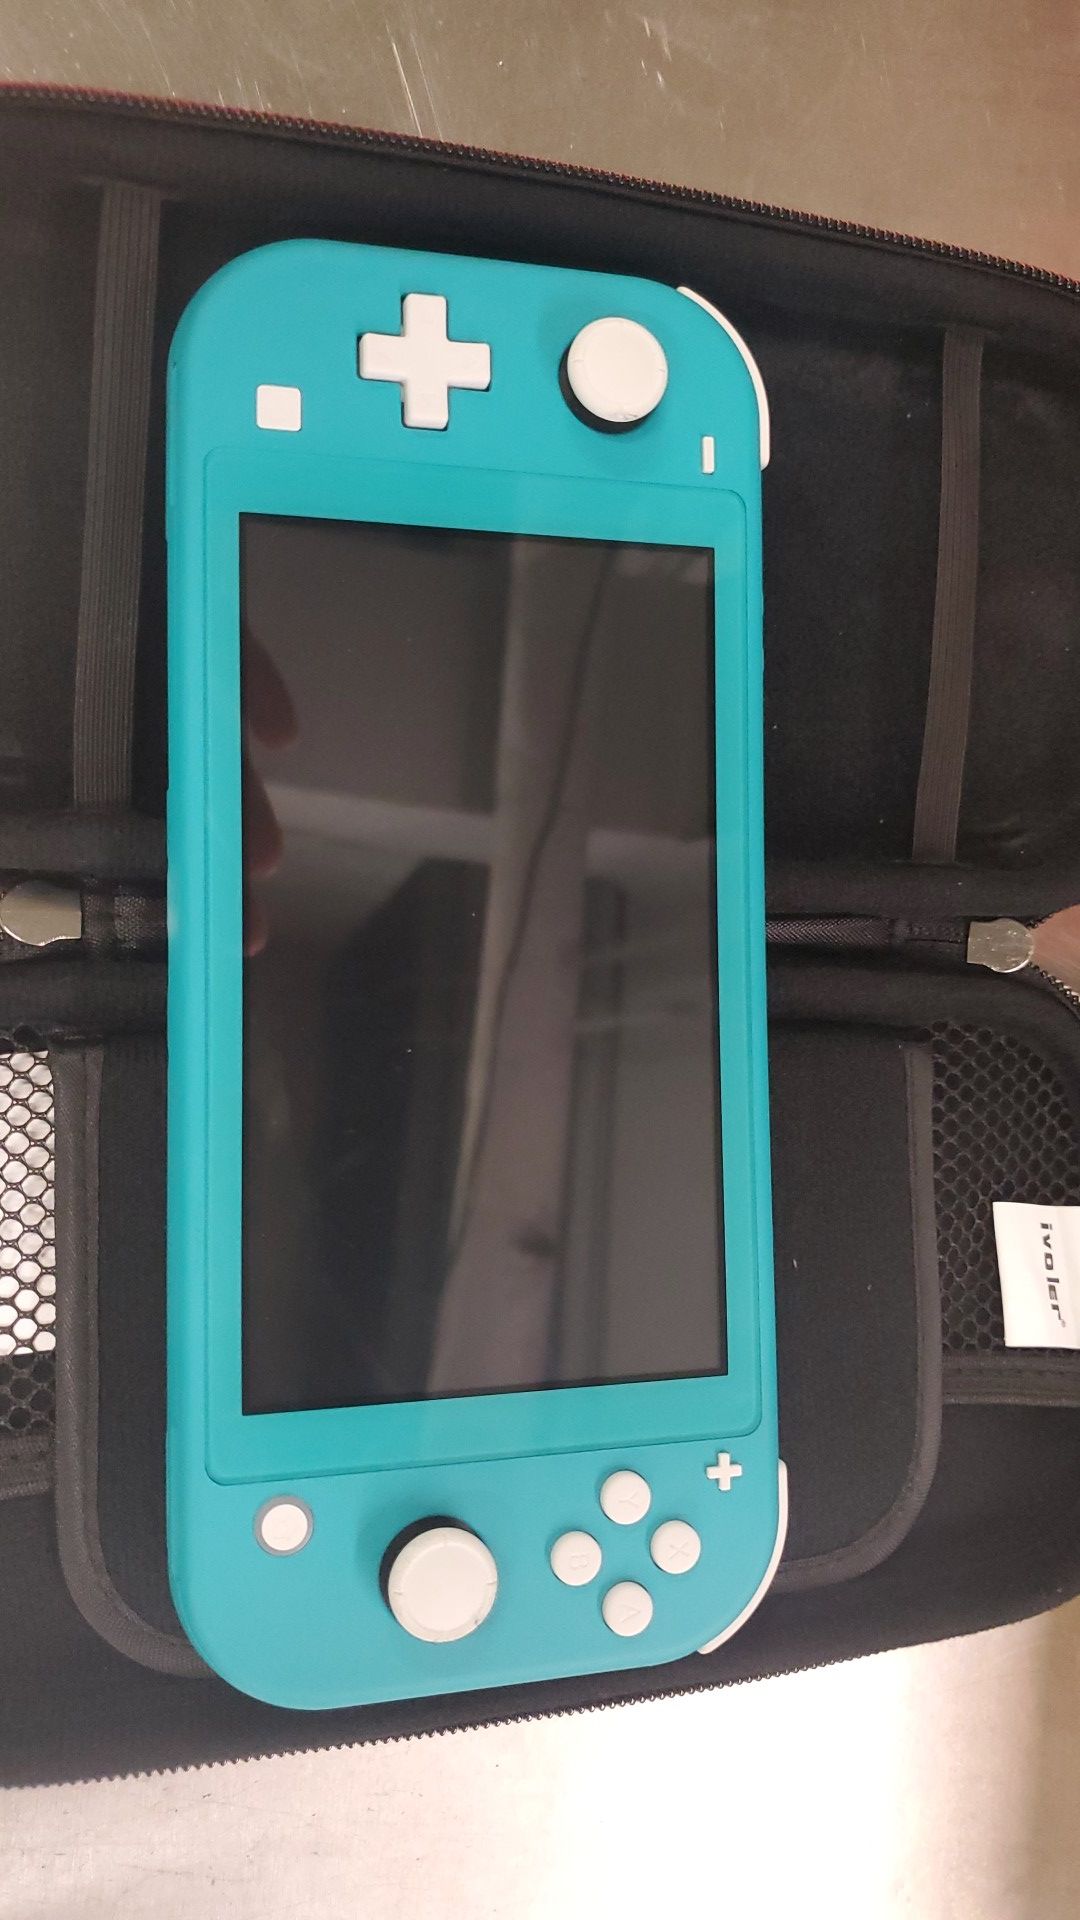 Nintendo Switch Lite for sale!!!! Hard to find!!